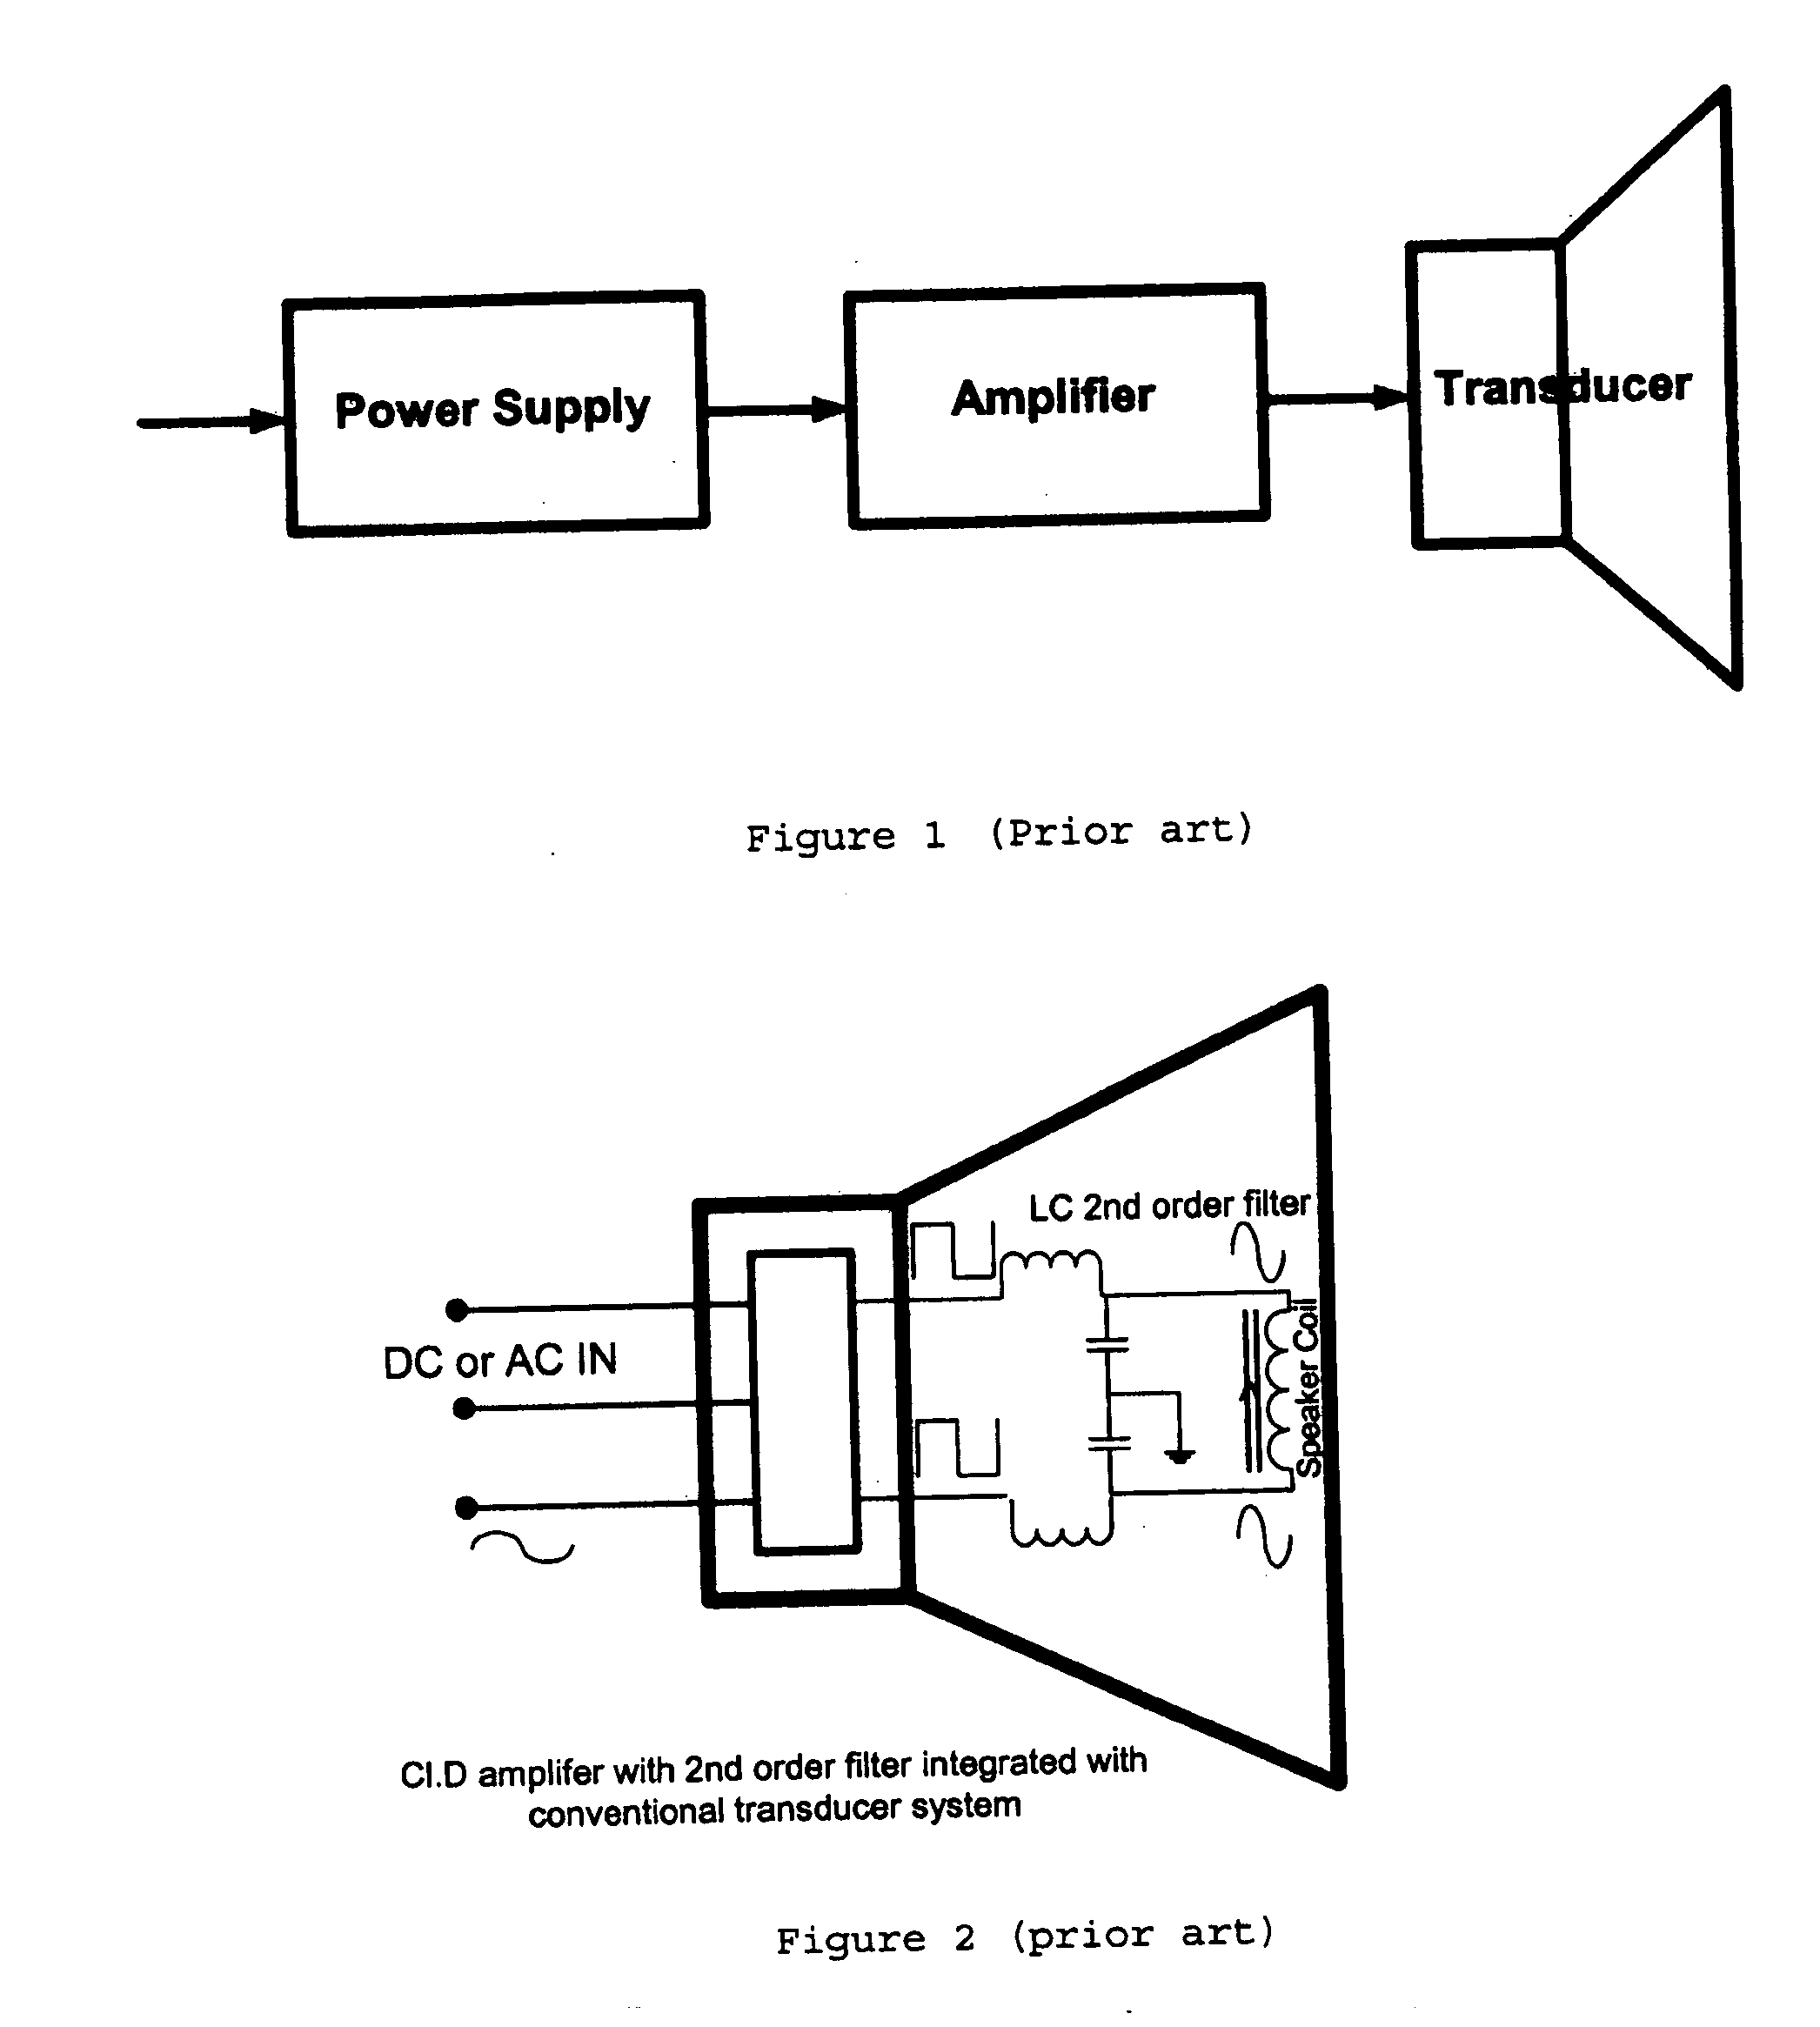 Apparatus for electric to acoustic conversion